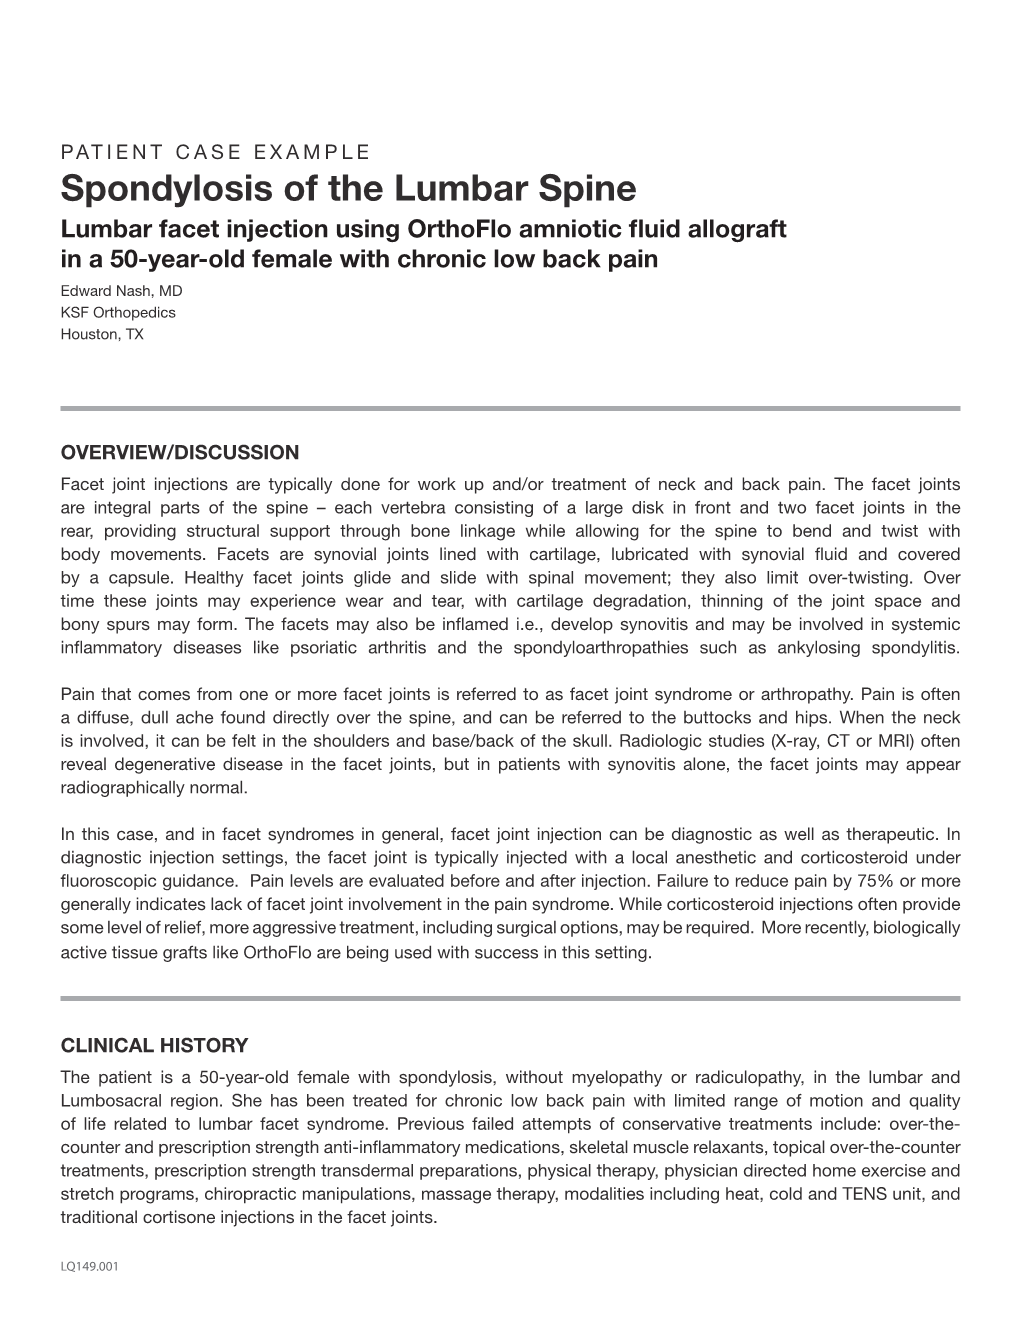 Spondylosis of the Lumbar Spine